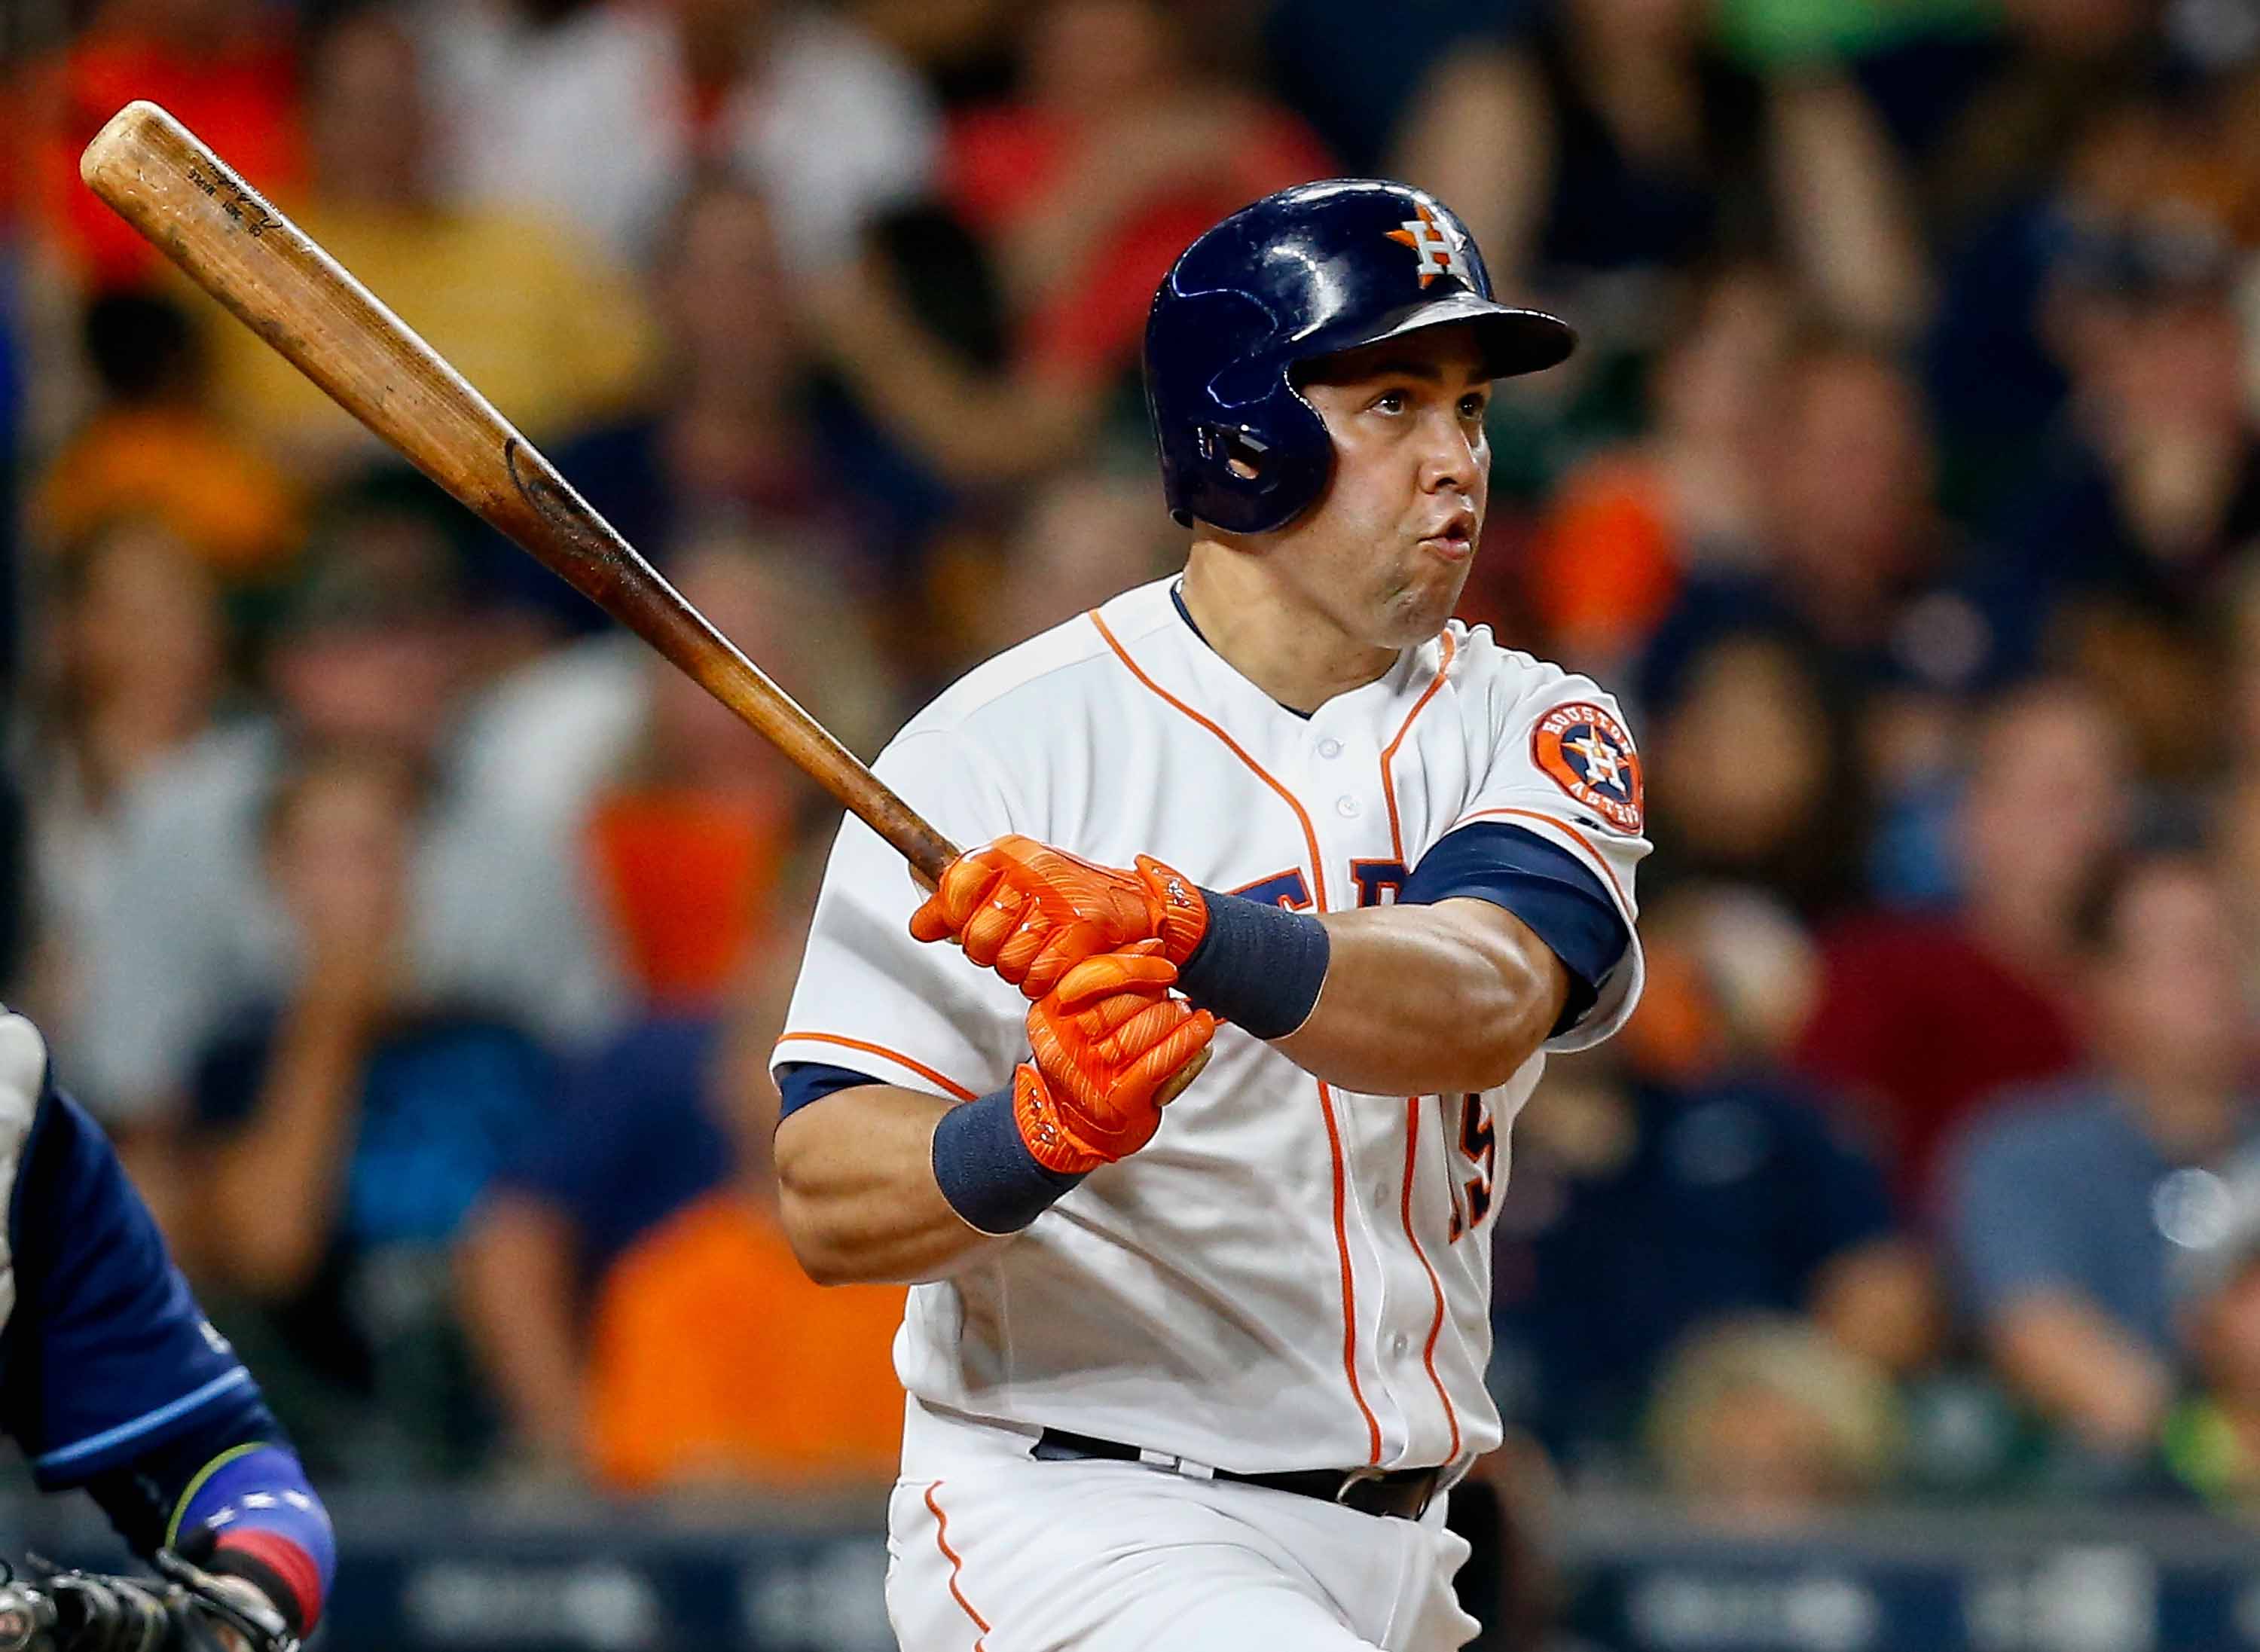 Mets' Carlos Beltrán won't discuss role in Astros' cheating